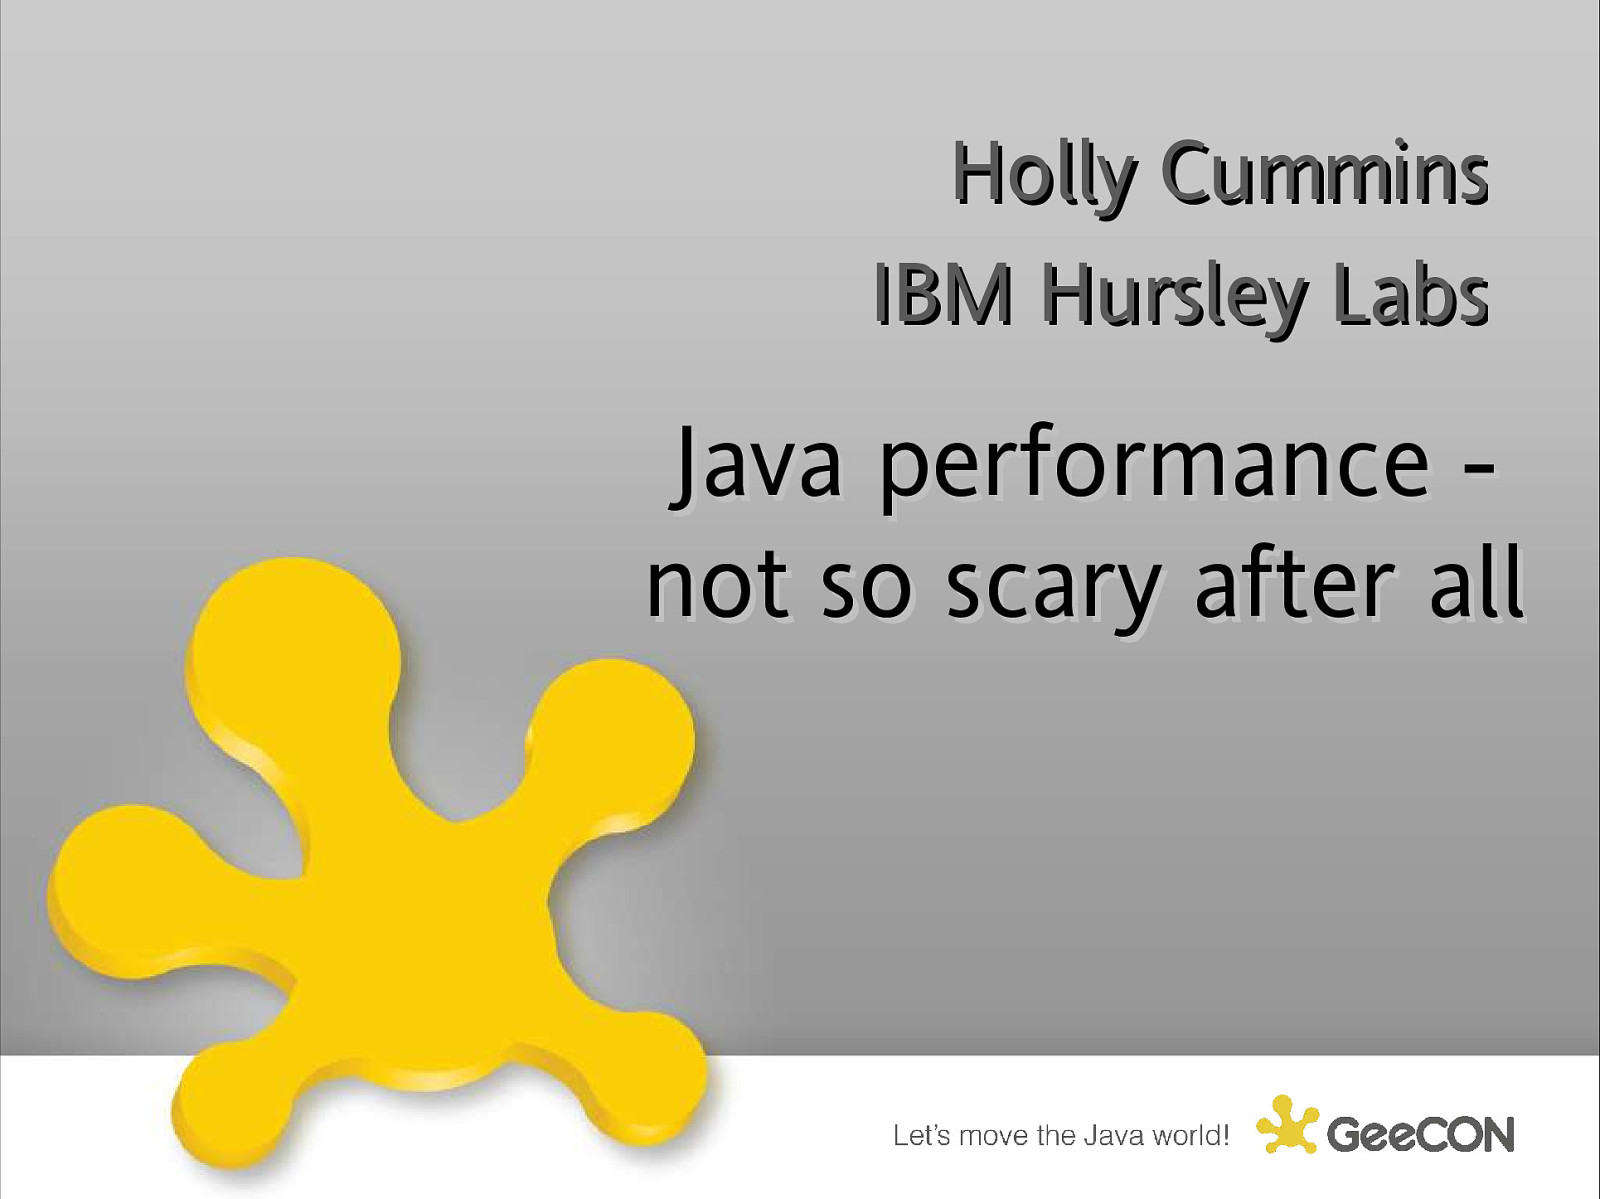 Java performance - not so scary after all